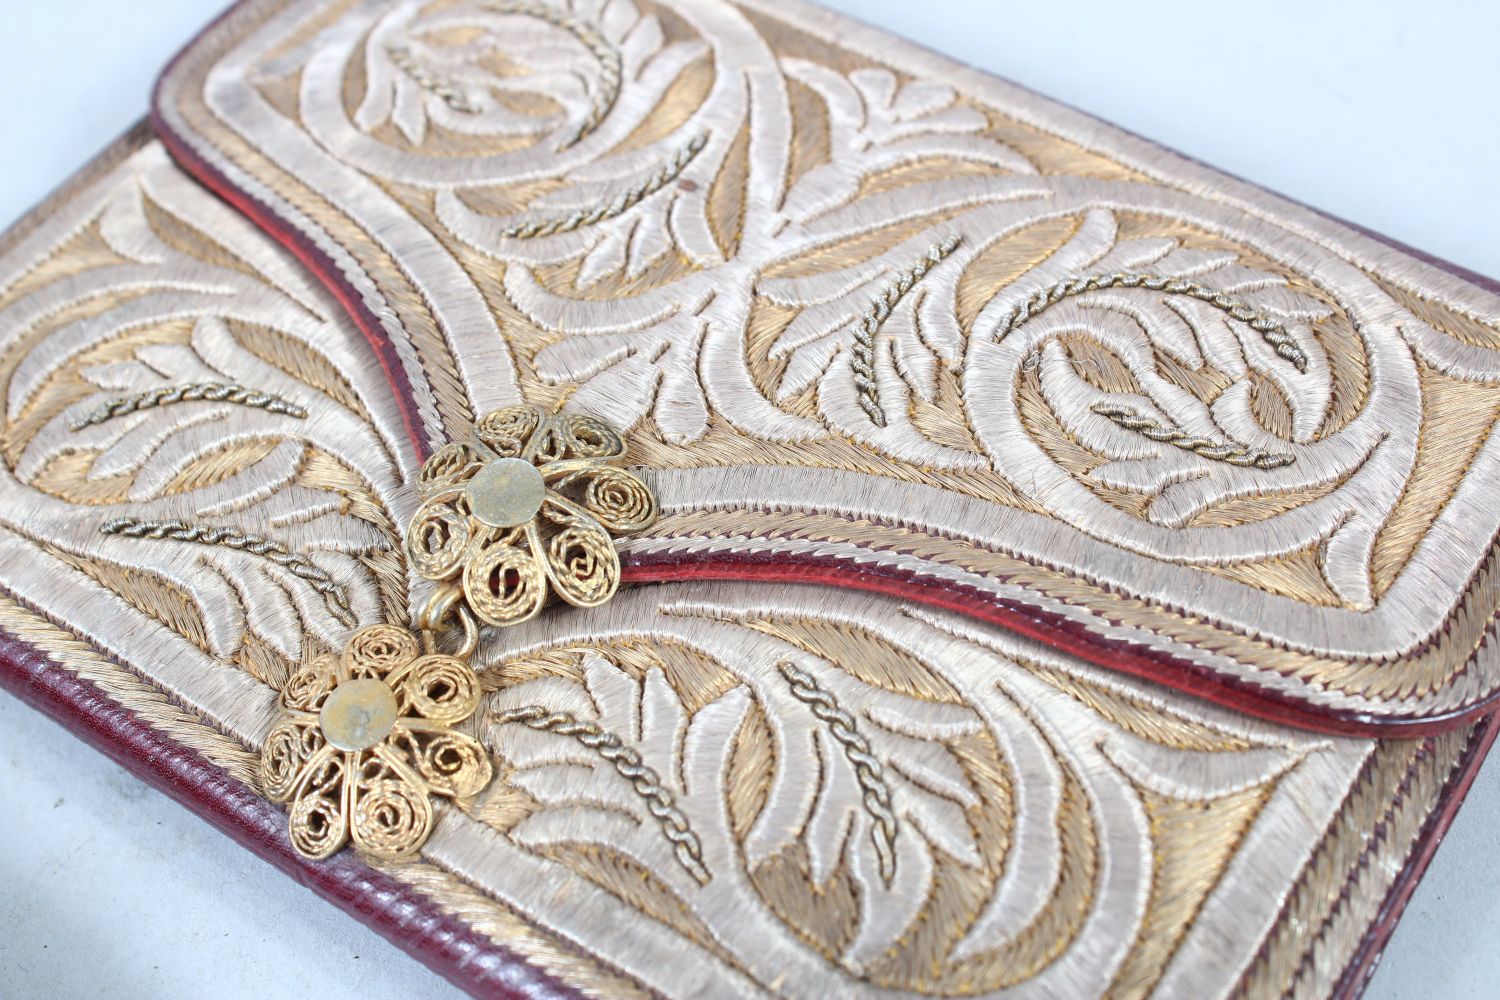 TWO OTTOMAN SILVER THREAD DECORATED LEATHER WALLETS, one dated 1908, 14cm and 10cm wide, (2). - Image 2 of 6